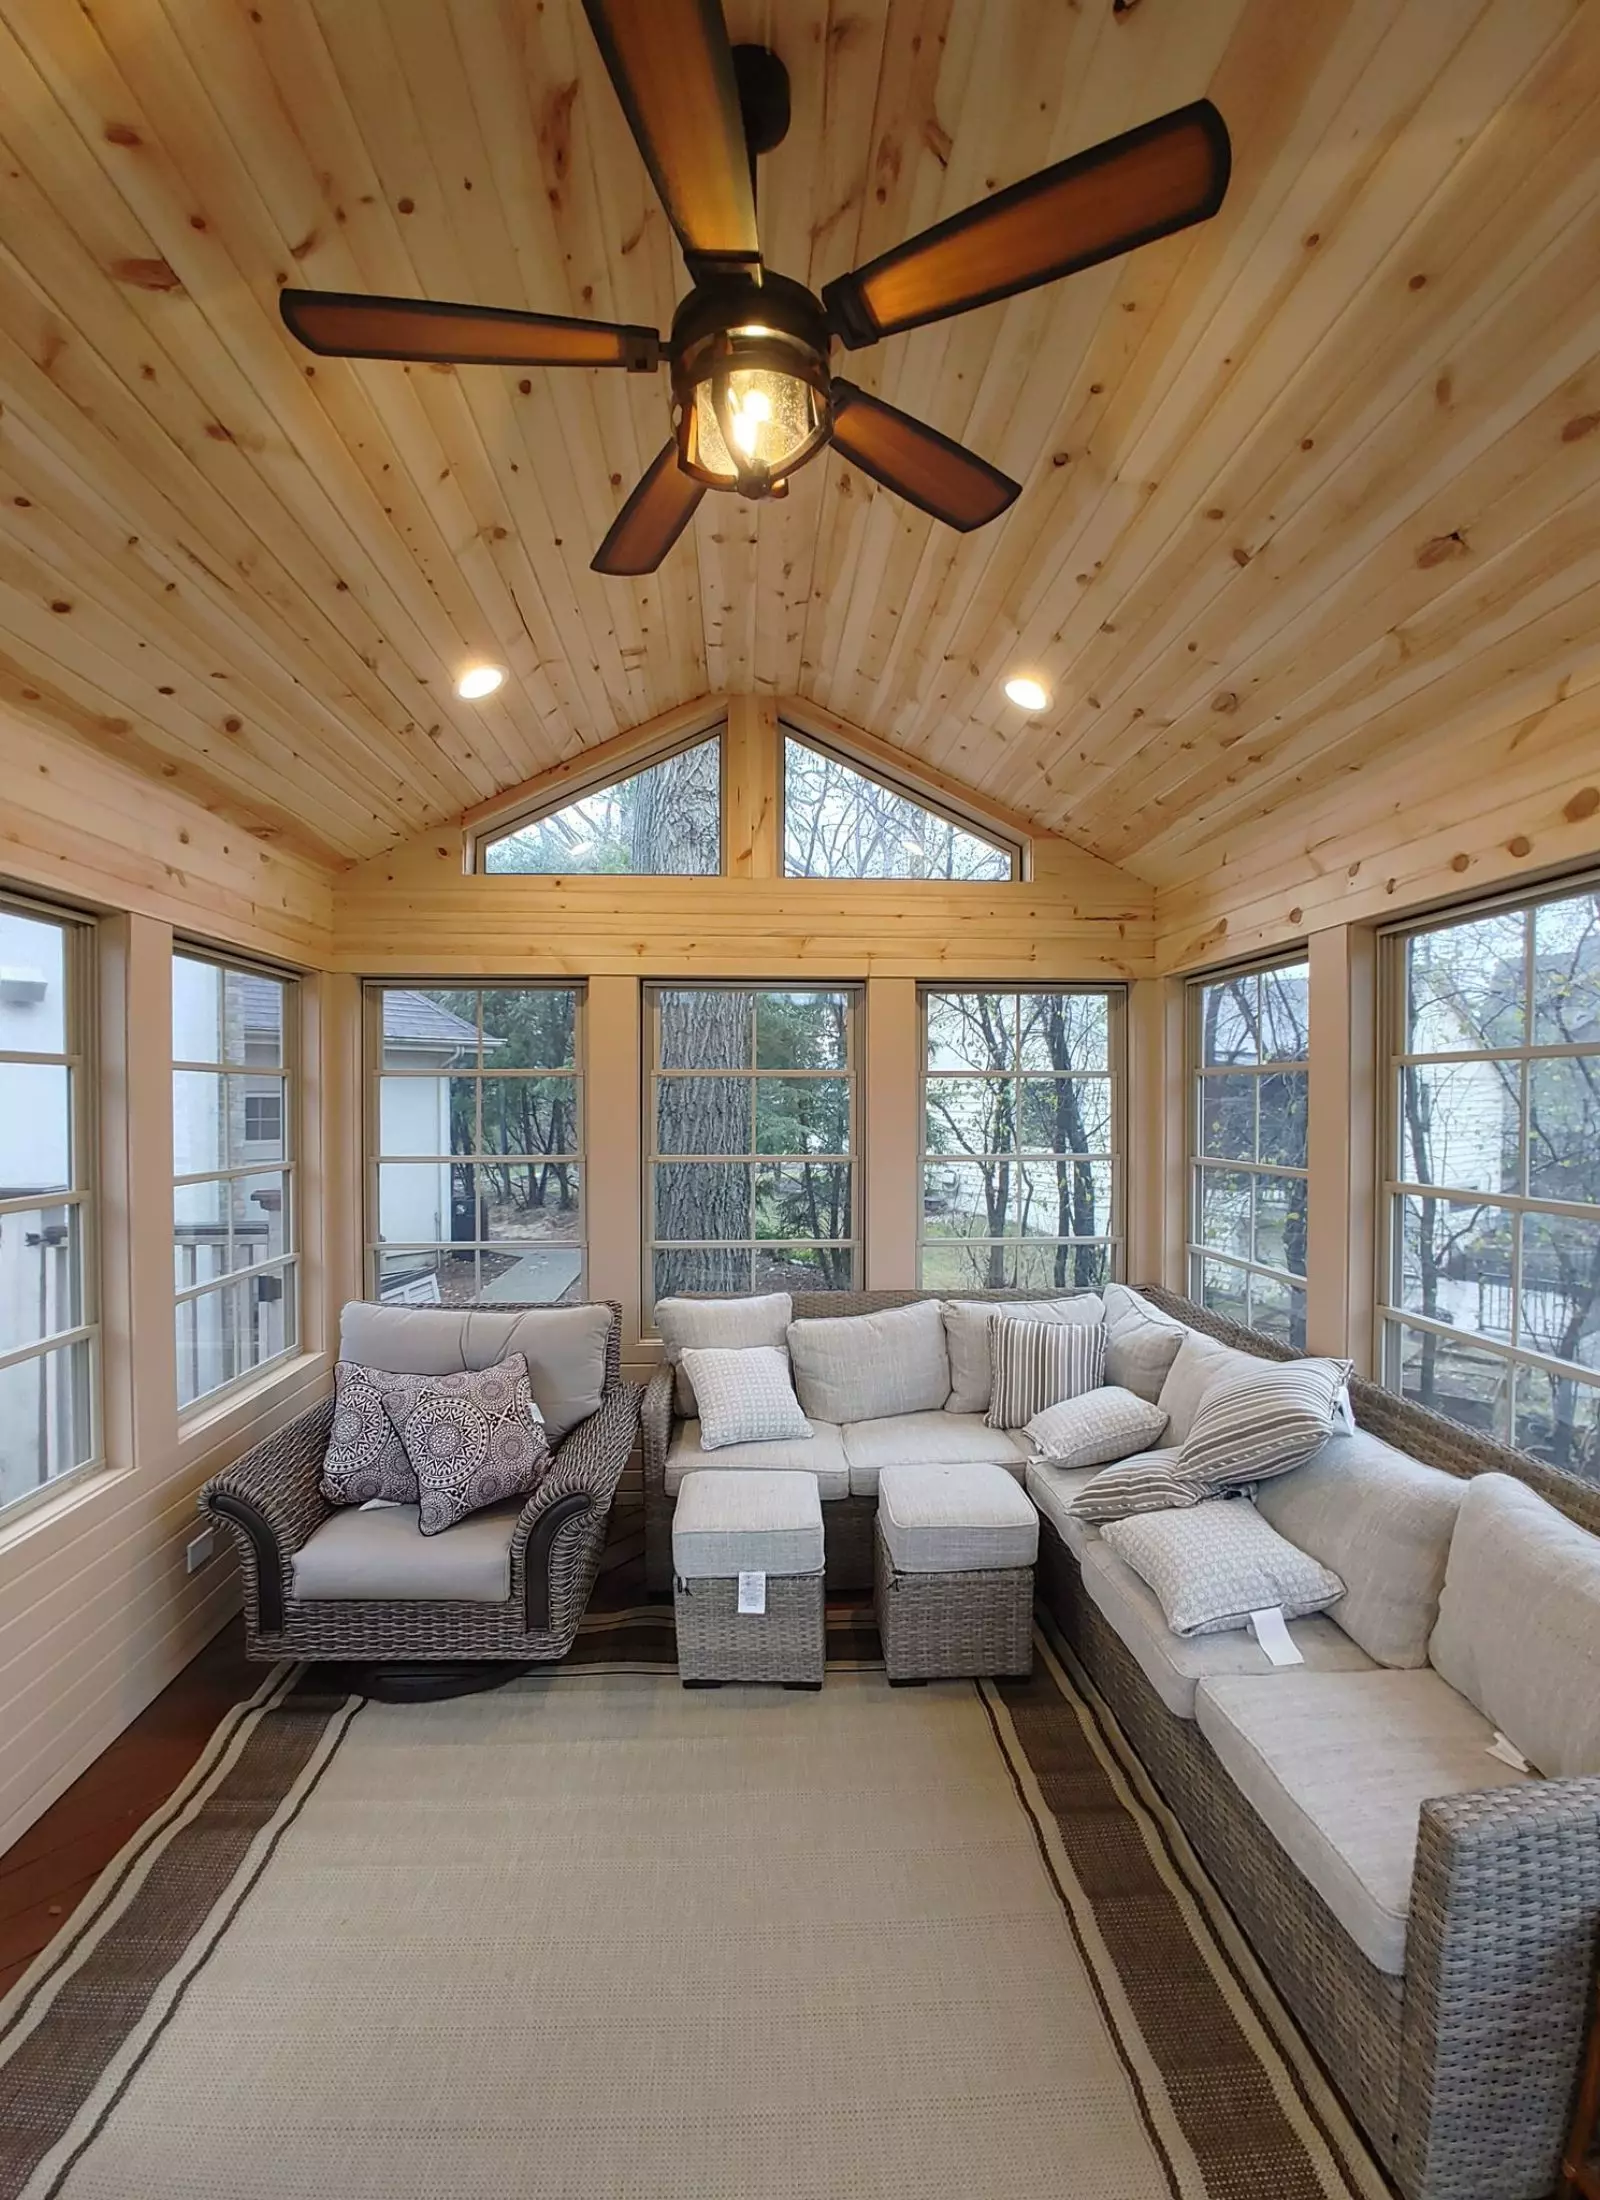 A sunroom with wicker furniture and a ceiling fan.